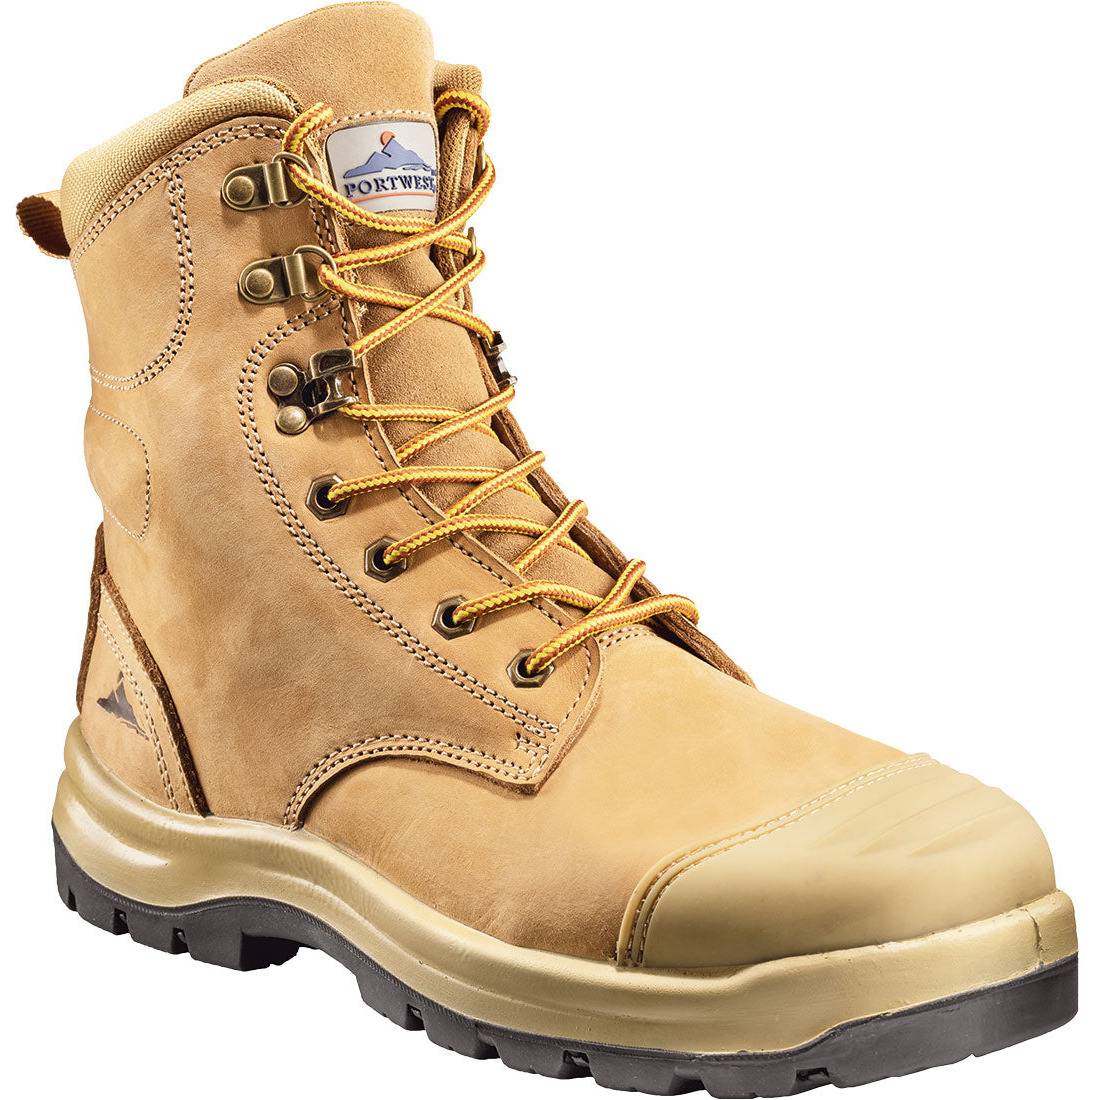 Port West Rockley Safety Boot - FC30